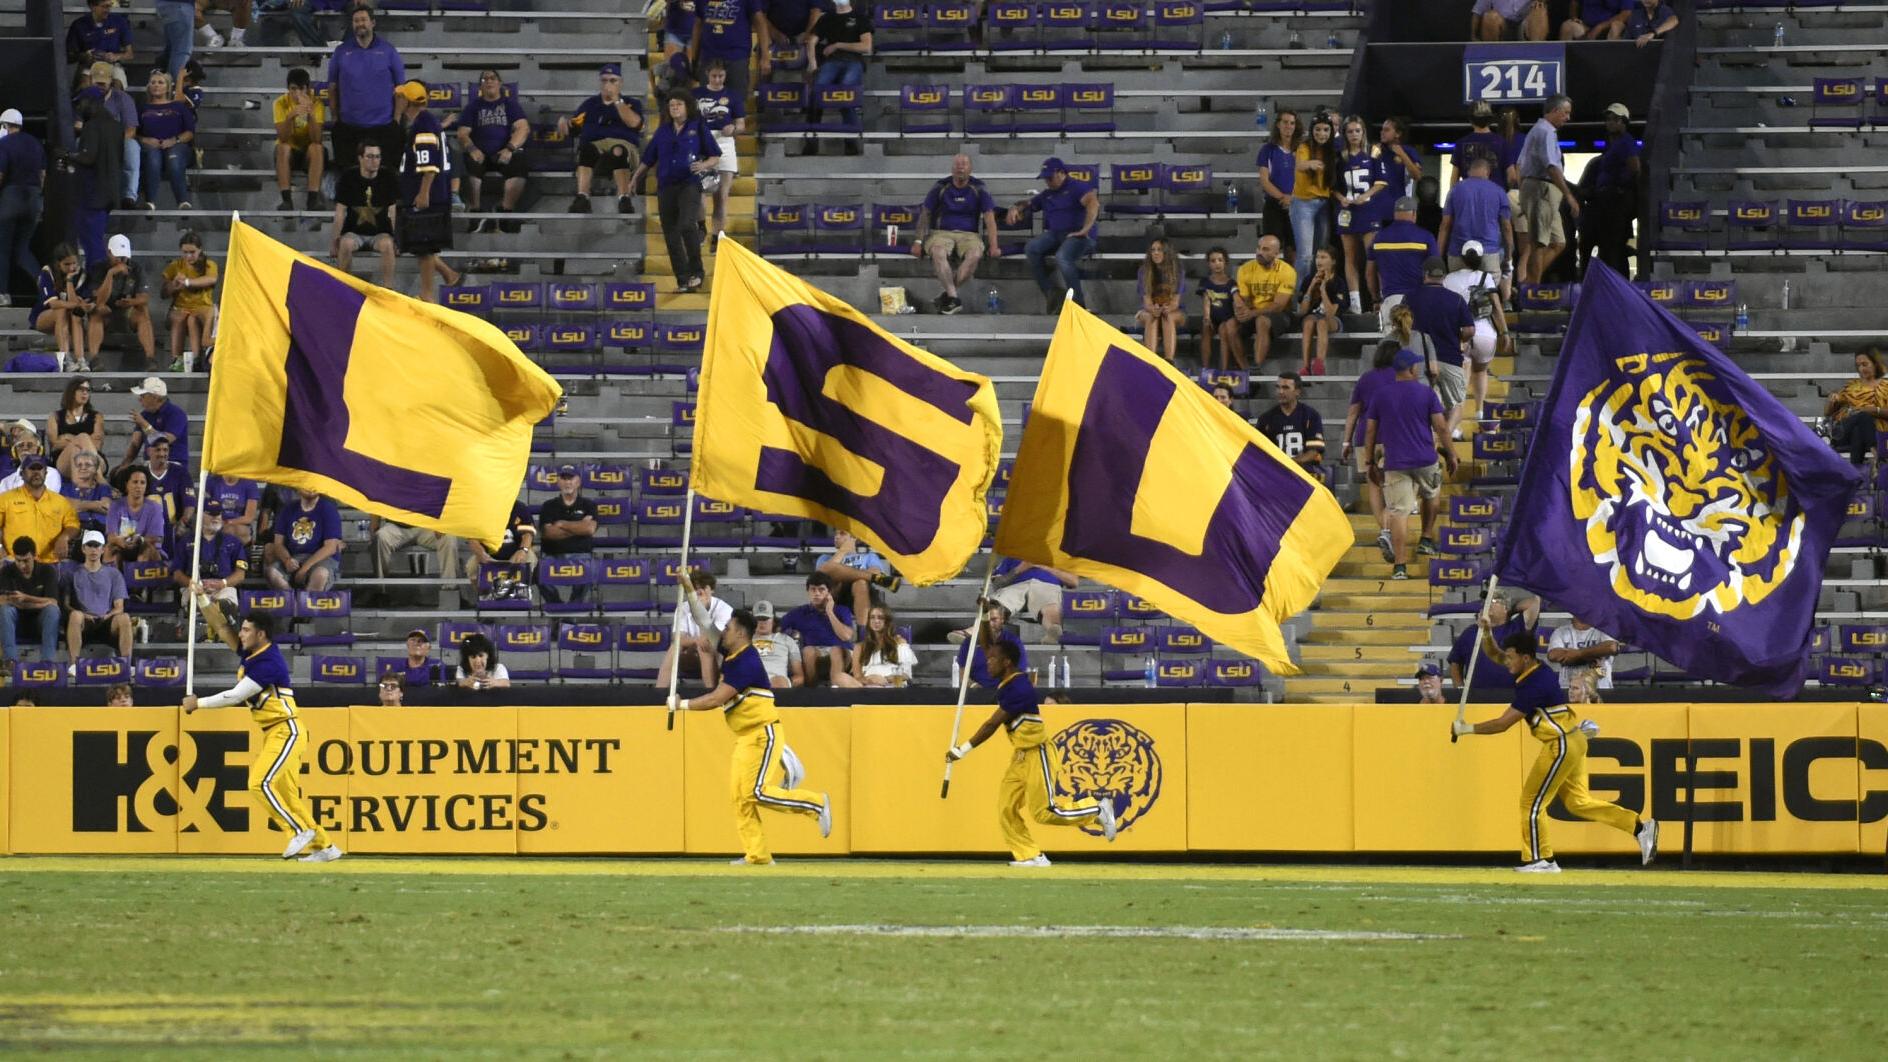 Lsu Football 2022 Schedule Ready For 2022? Lsu Football Schedule Released; See The Tigers' Key Dates,  Opponents | Lsu | Theadvocate.com